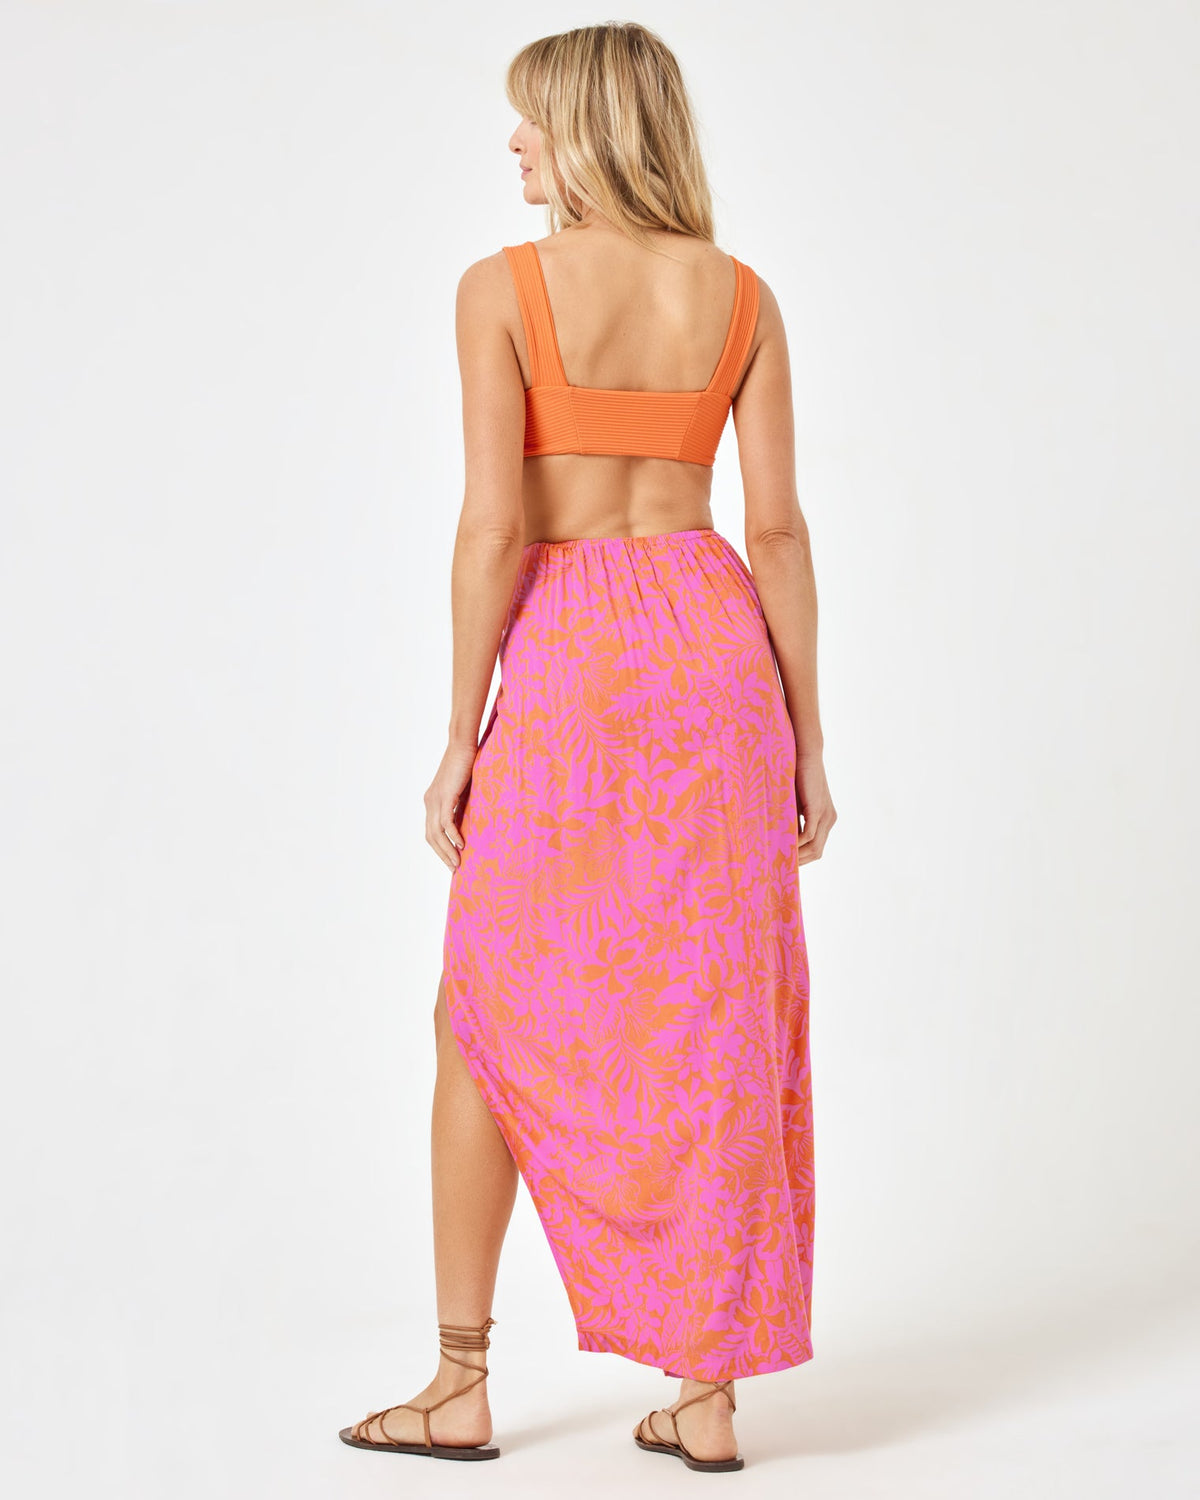 Printed Mia Cover-Up Path To Paradise | Model: Lura (size: S)